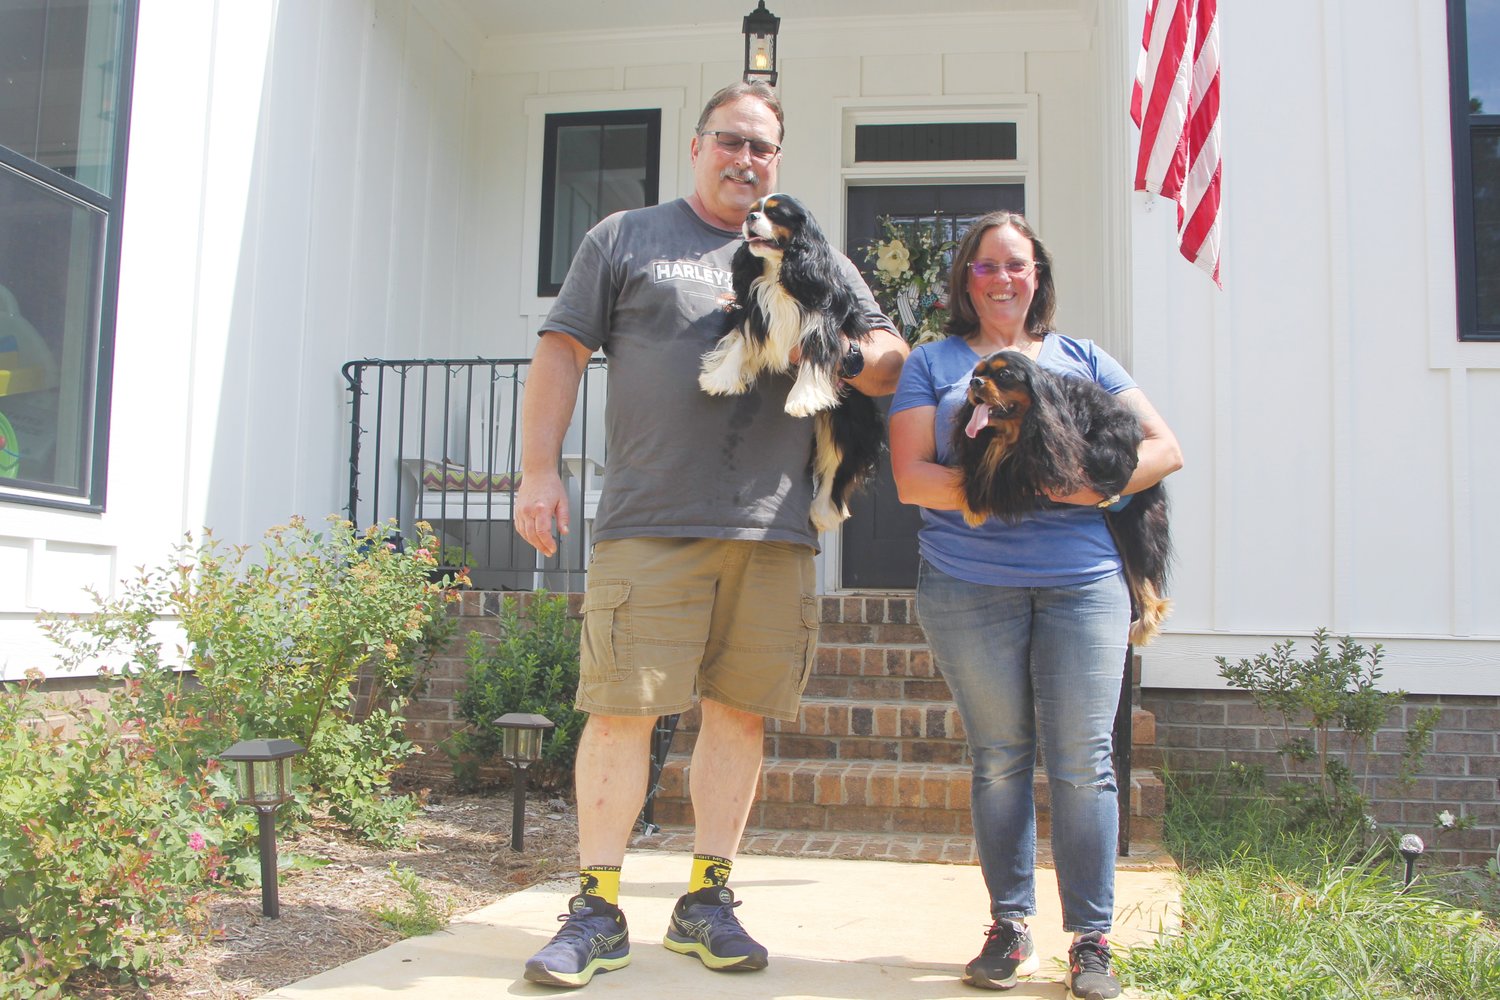 After months of navigating the competitive housing market in the Triangle, Mike Beasley and Beci Markijohn Beasley of Apex found just what they were looking for in Pittsboro — a spacious home and yard, and a dog-friendly neighborhood for their business, Kymerite Cavaliers.